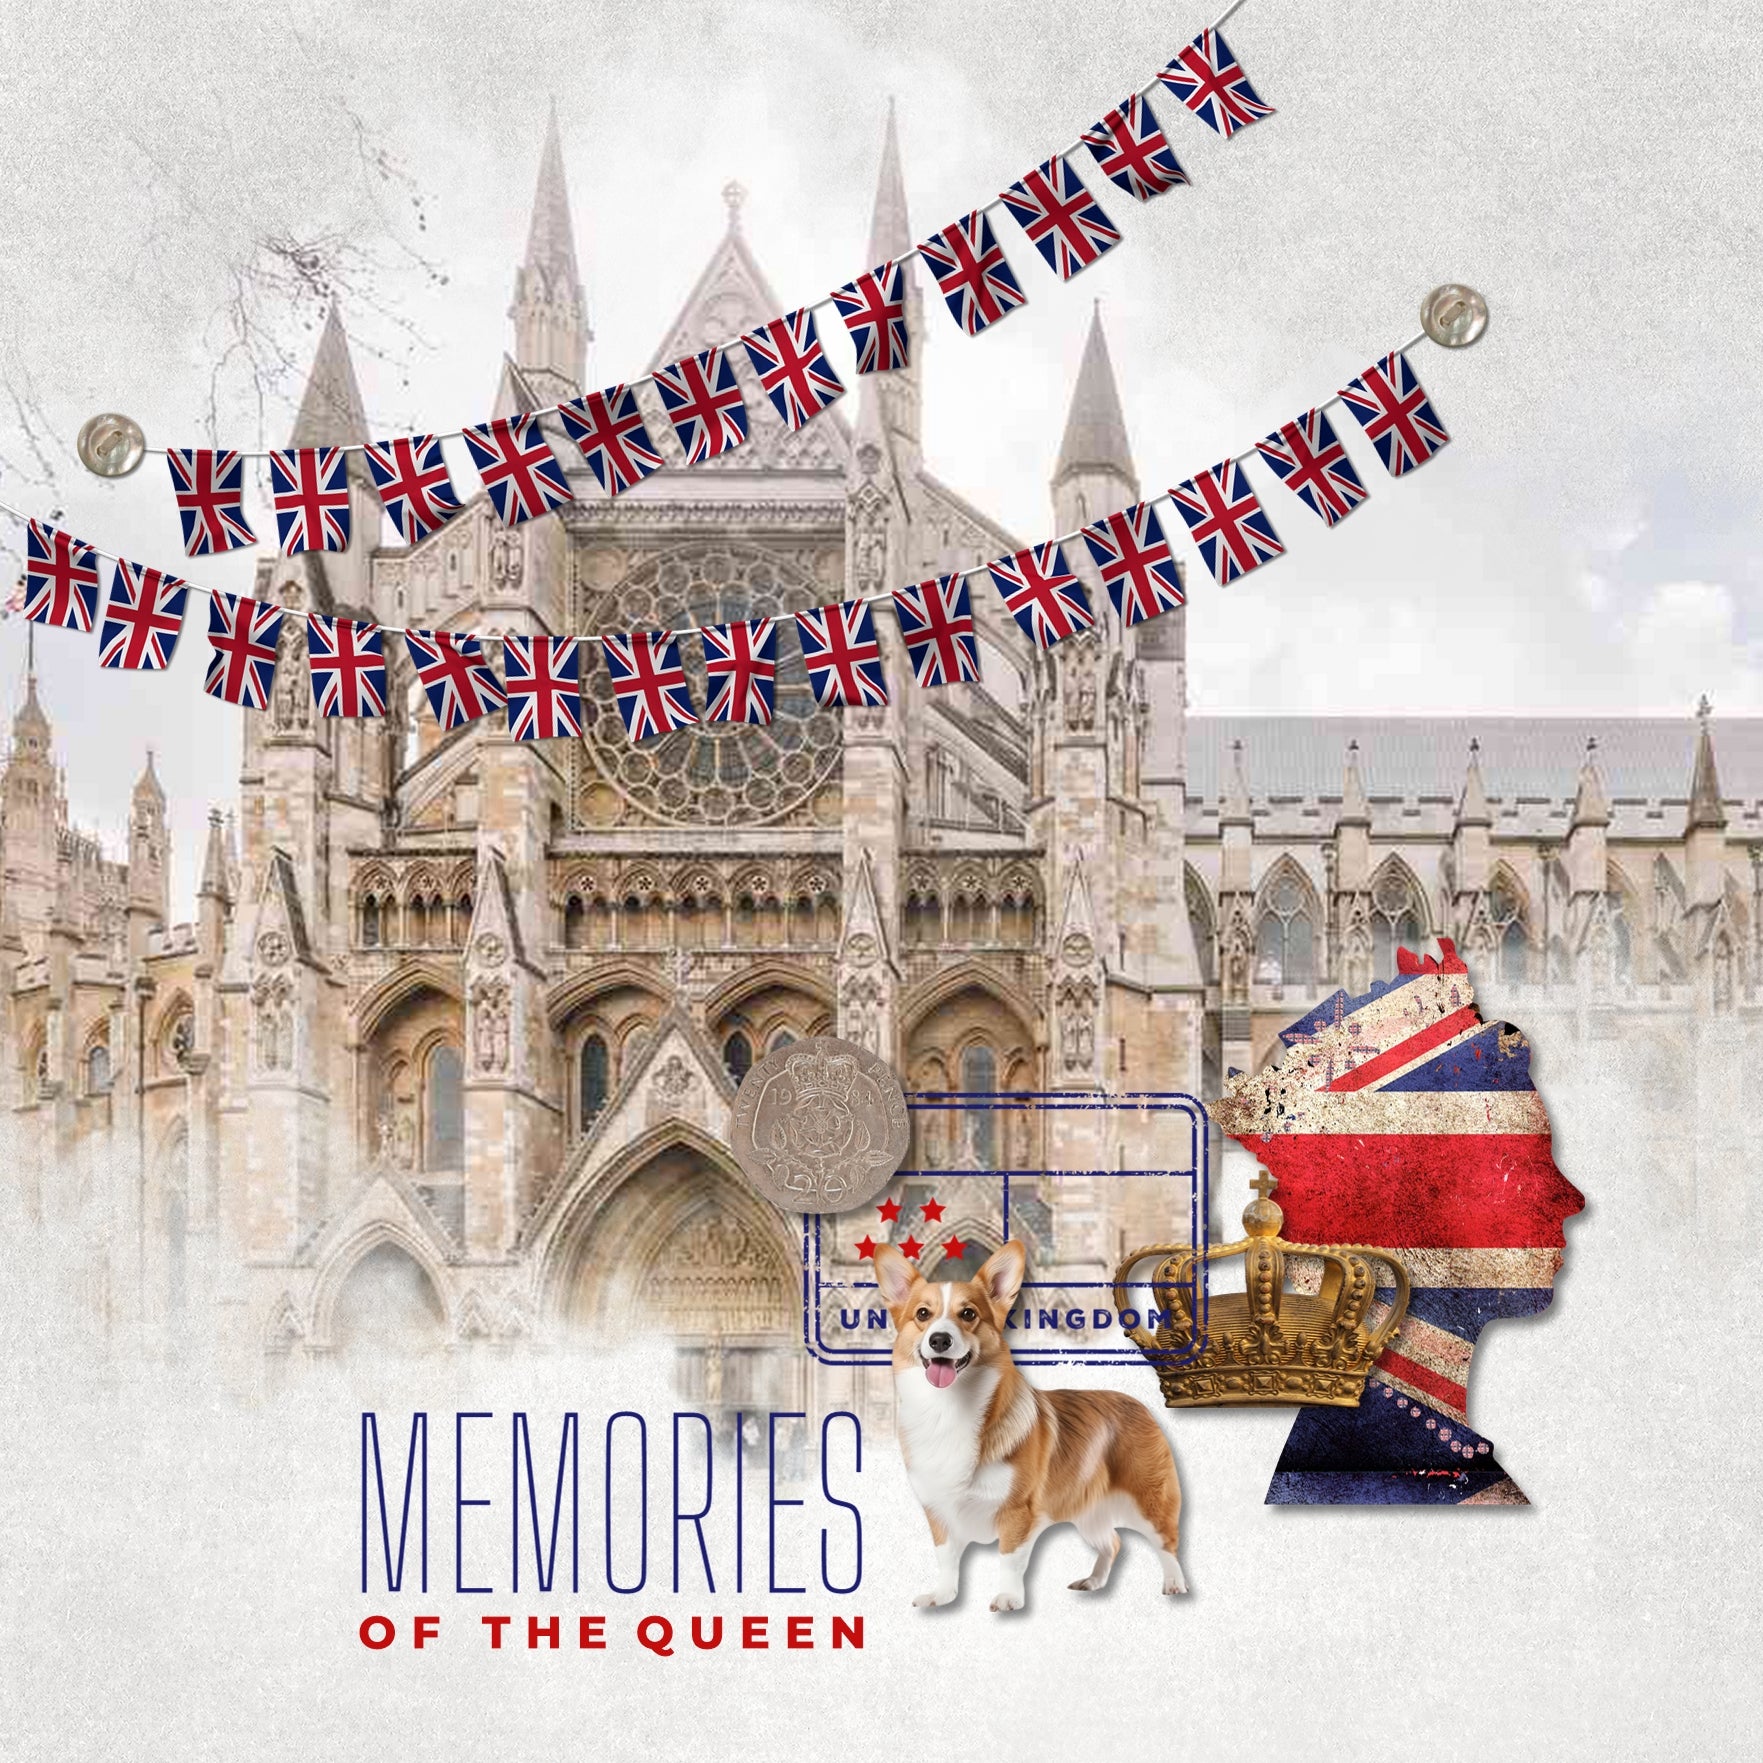 Celebrate the United Kingdom, England, Scotland, Northern Ireland, Wales, and all of Europe with these realistic digital art embellishments by Lucky Girl Creative. Great for adding that historic, vintage, and antique look to all your pages including family heritage and genealogy.